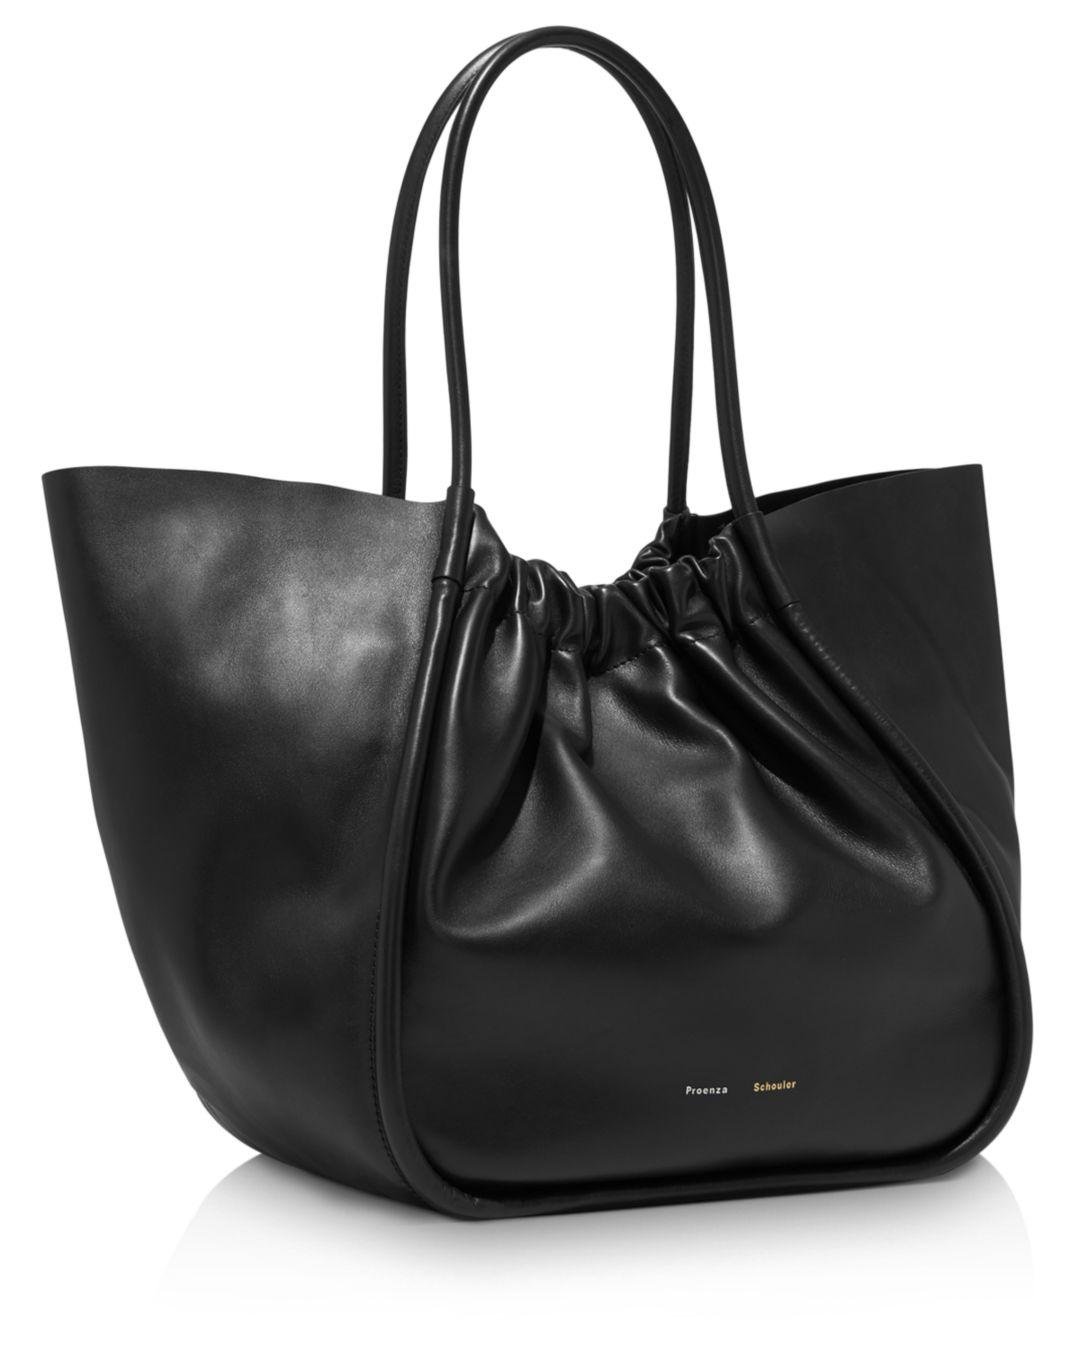 Proenza Schouler Extra Large Ruched Leather Tote in Black - Lyst